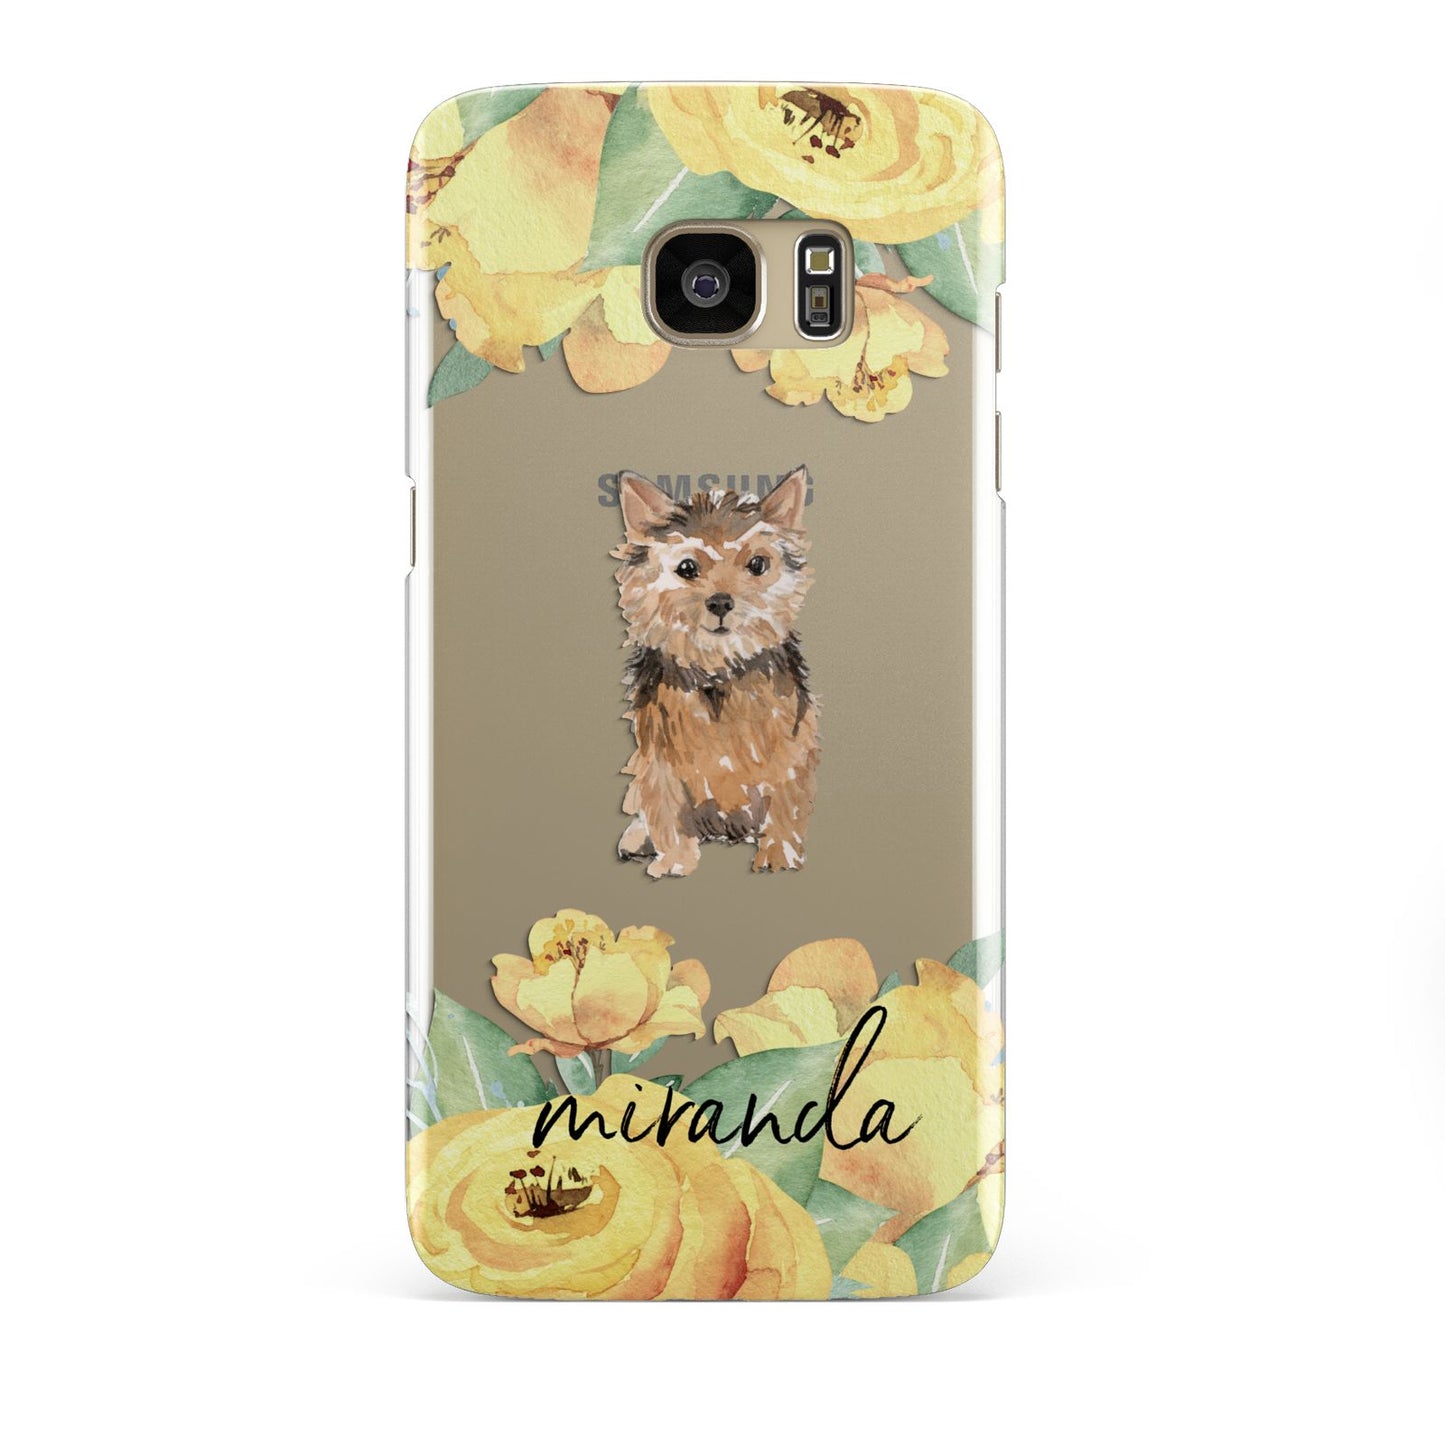 Personalised Norwich Terrier Samsung Galaxy S7 Edge Case